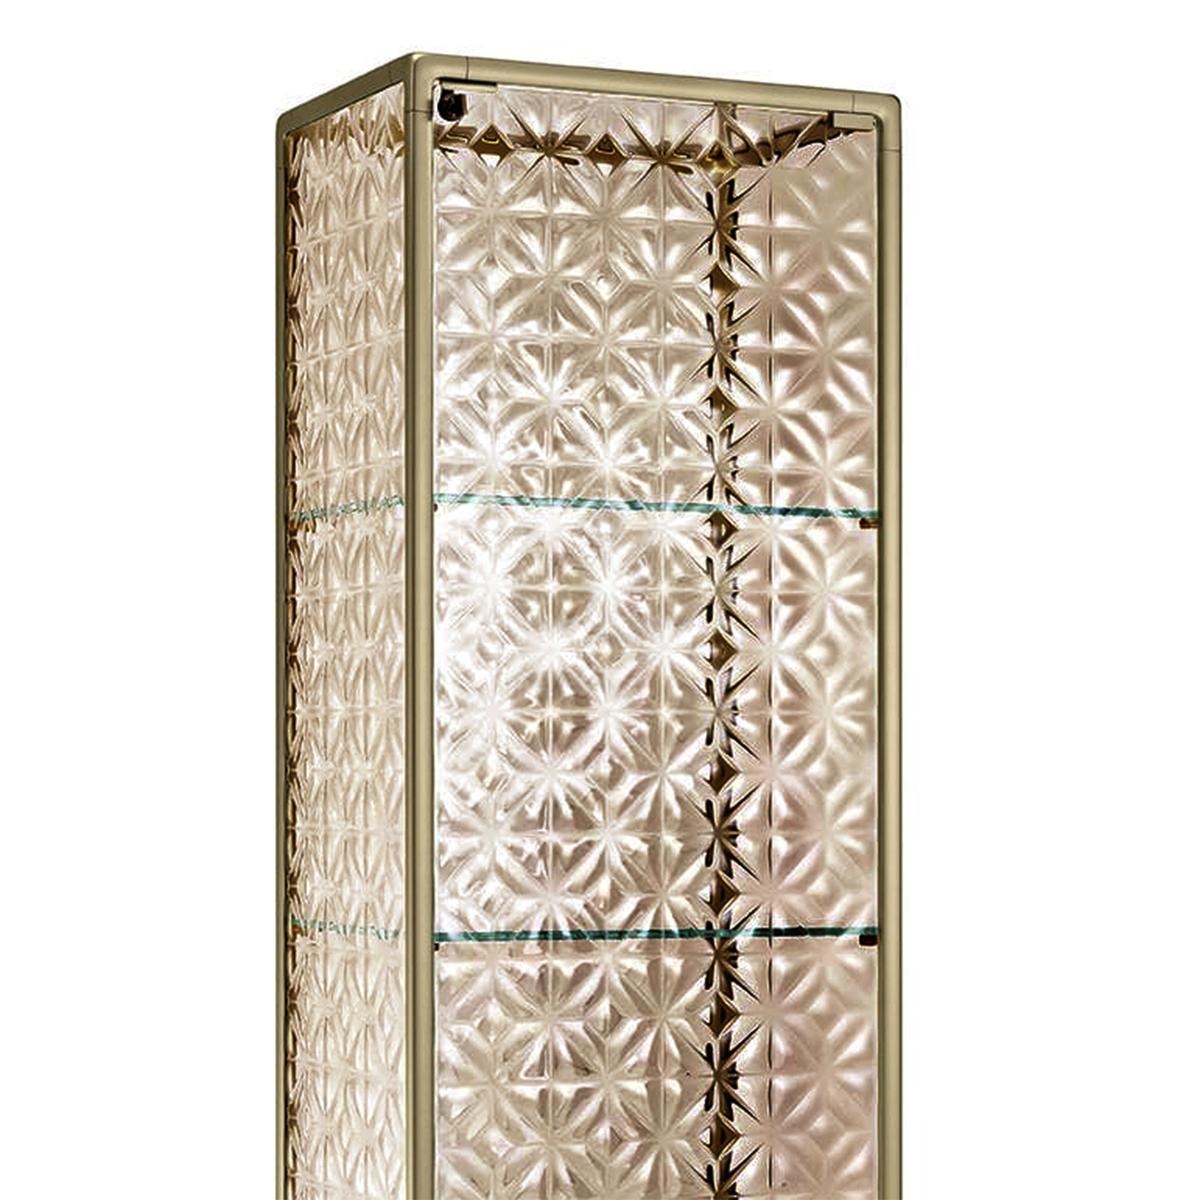 Glass Case Genova Medium with aluminum structure
in veneered brass finish. With fused carved bronzed glass
structure and doors, 6mm thickness. Inside tempered 
glass shelves in 8mm thickness. Each shelf can support 
20 kilos. Base in tempered